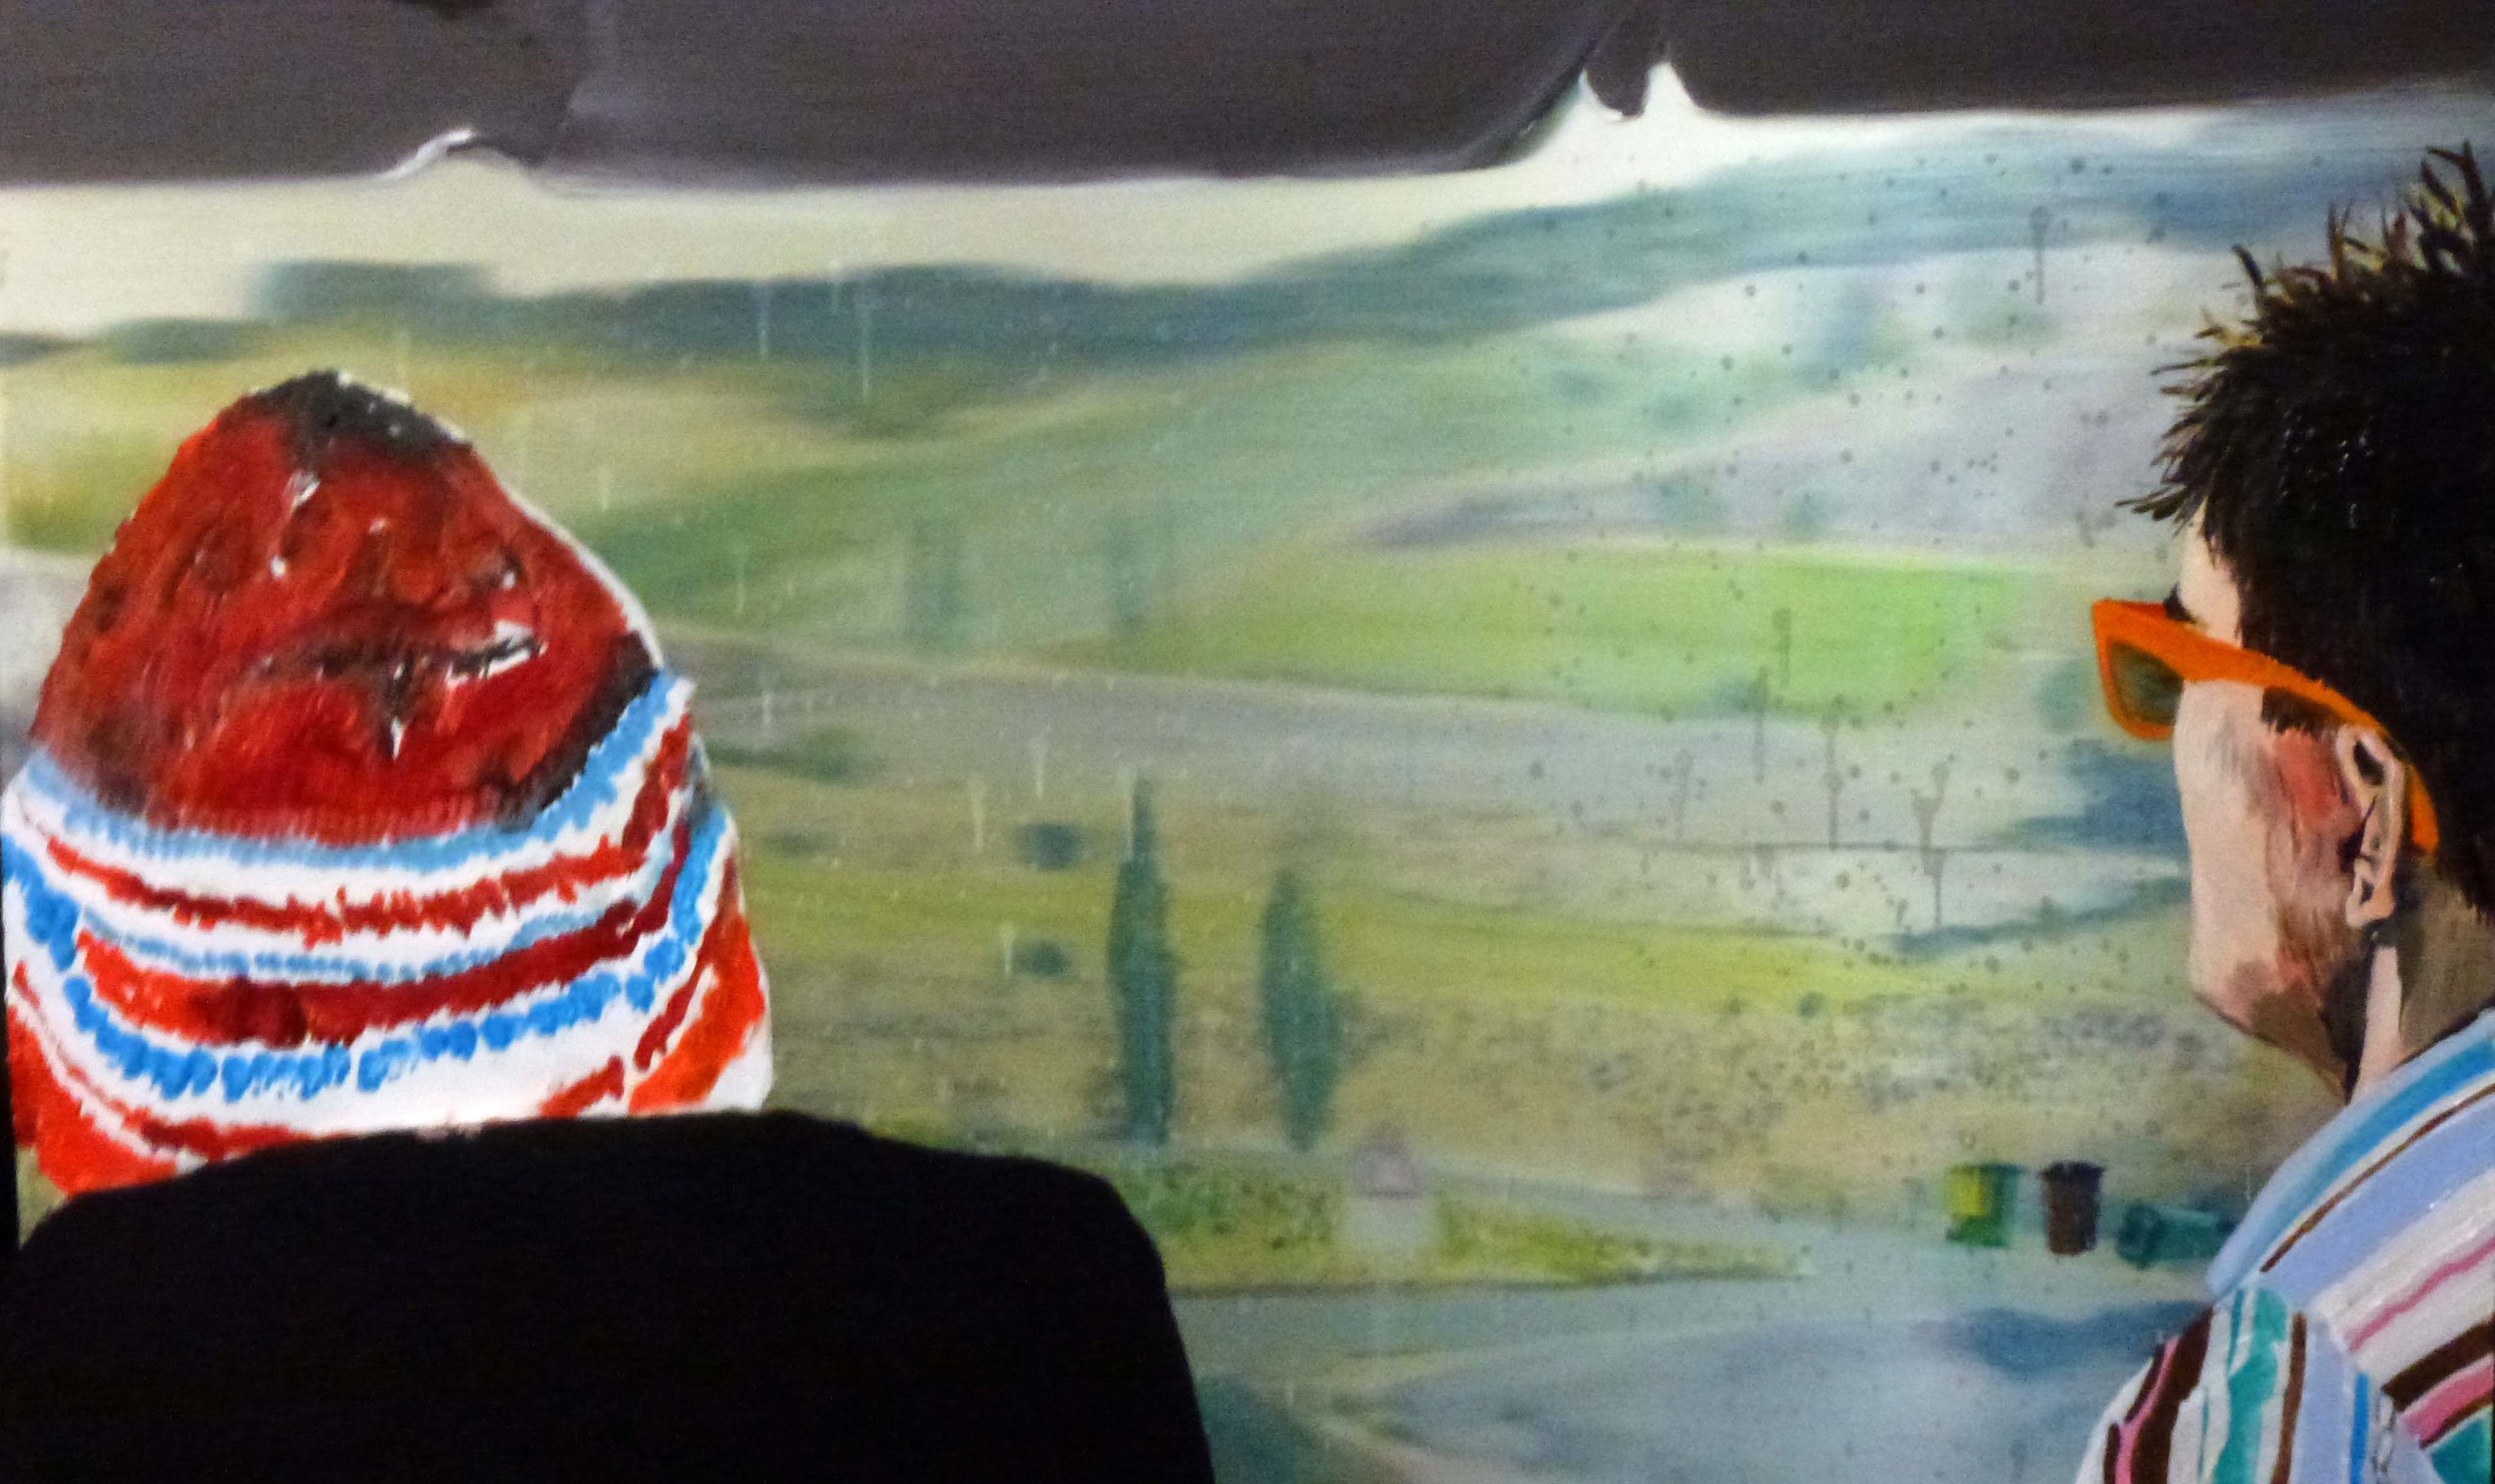   Travelling (Jim and I),  2012 Acrylic, oil and automotive enamel on lenticular print 44 x 61cm 